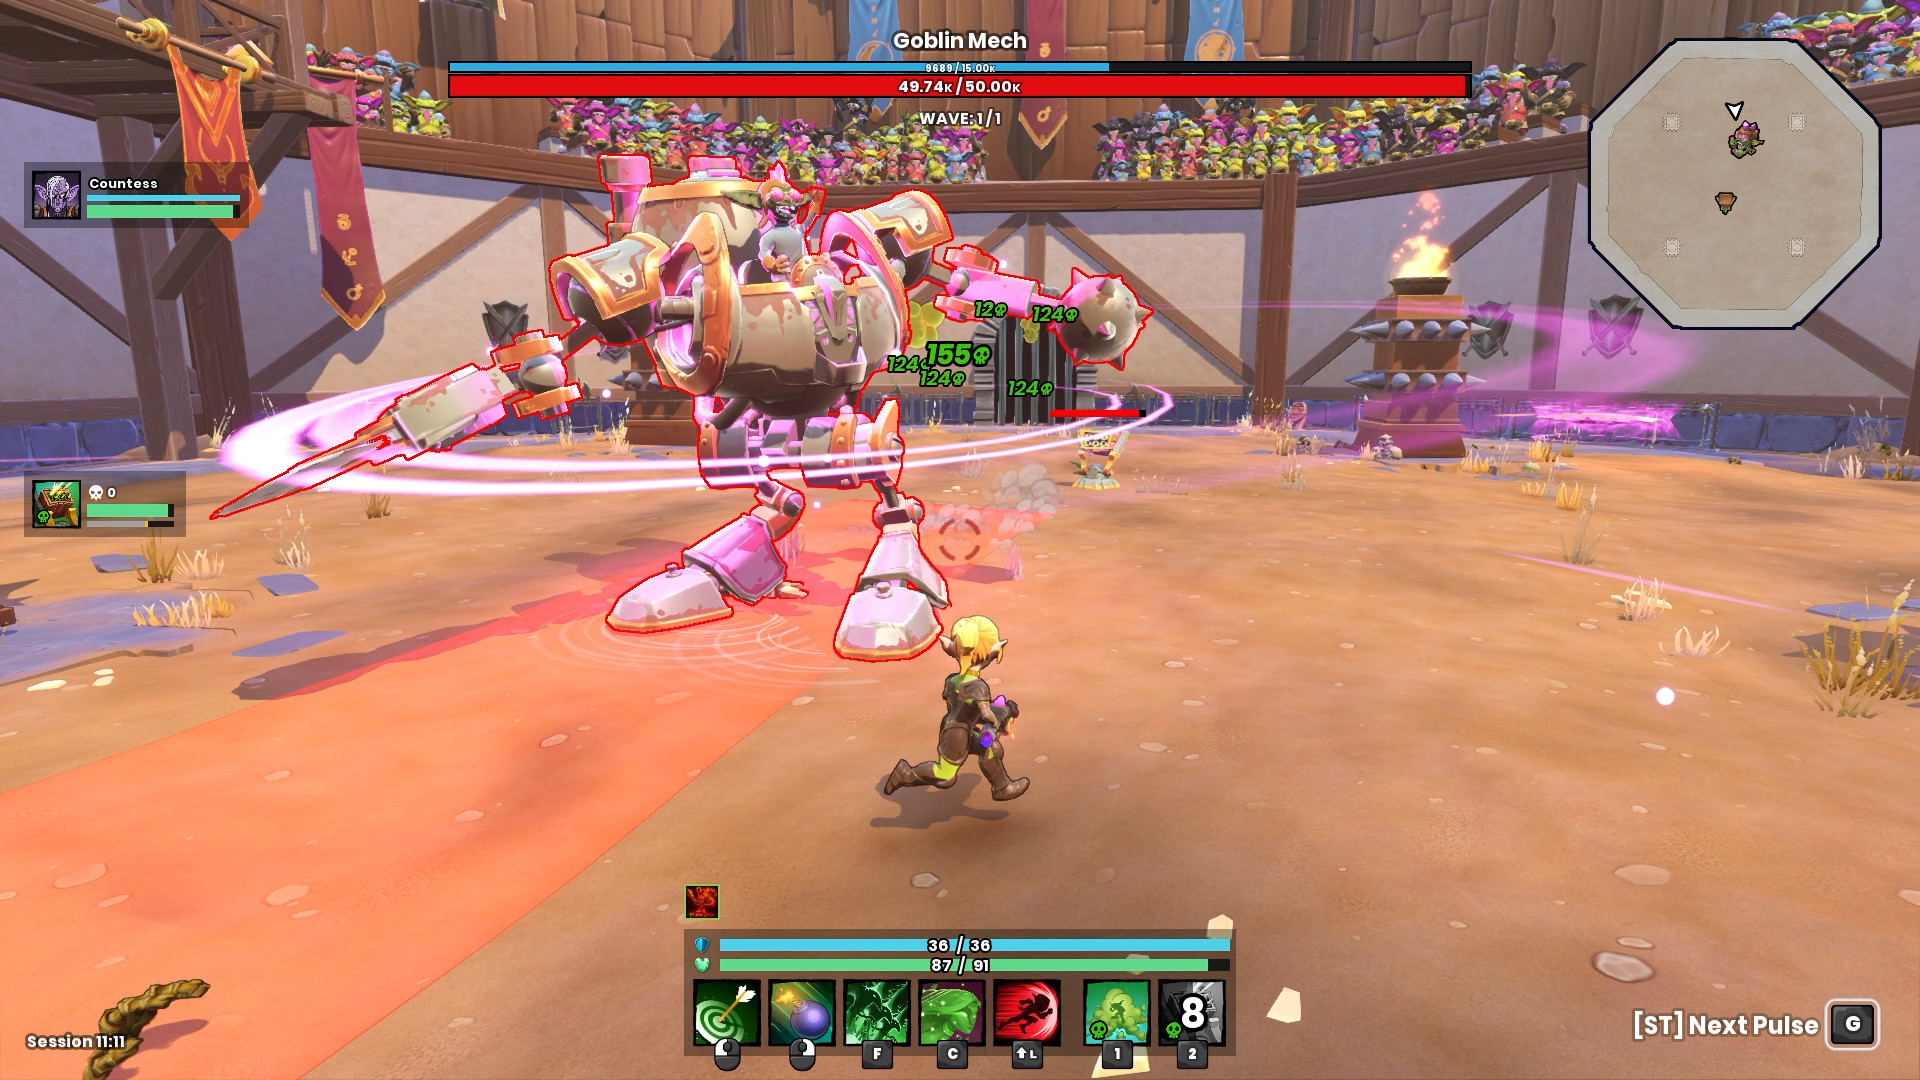 Dungeon Defenders: Going Rogue Steam CD Key